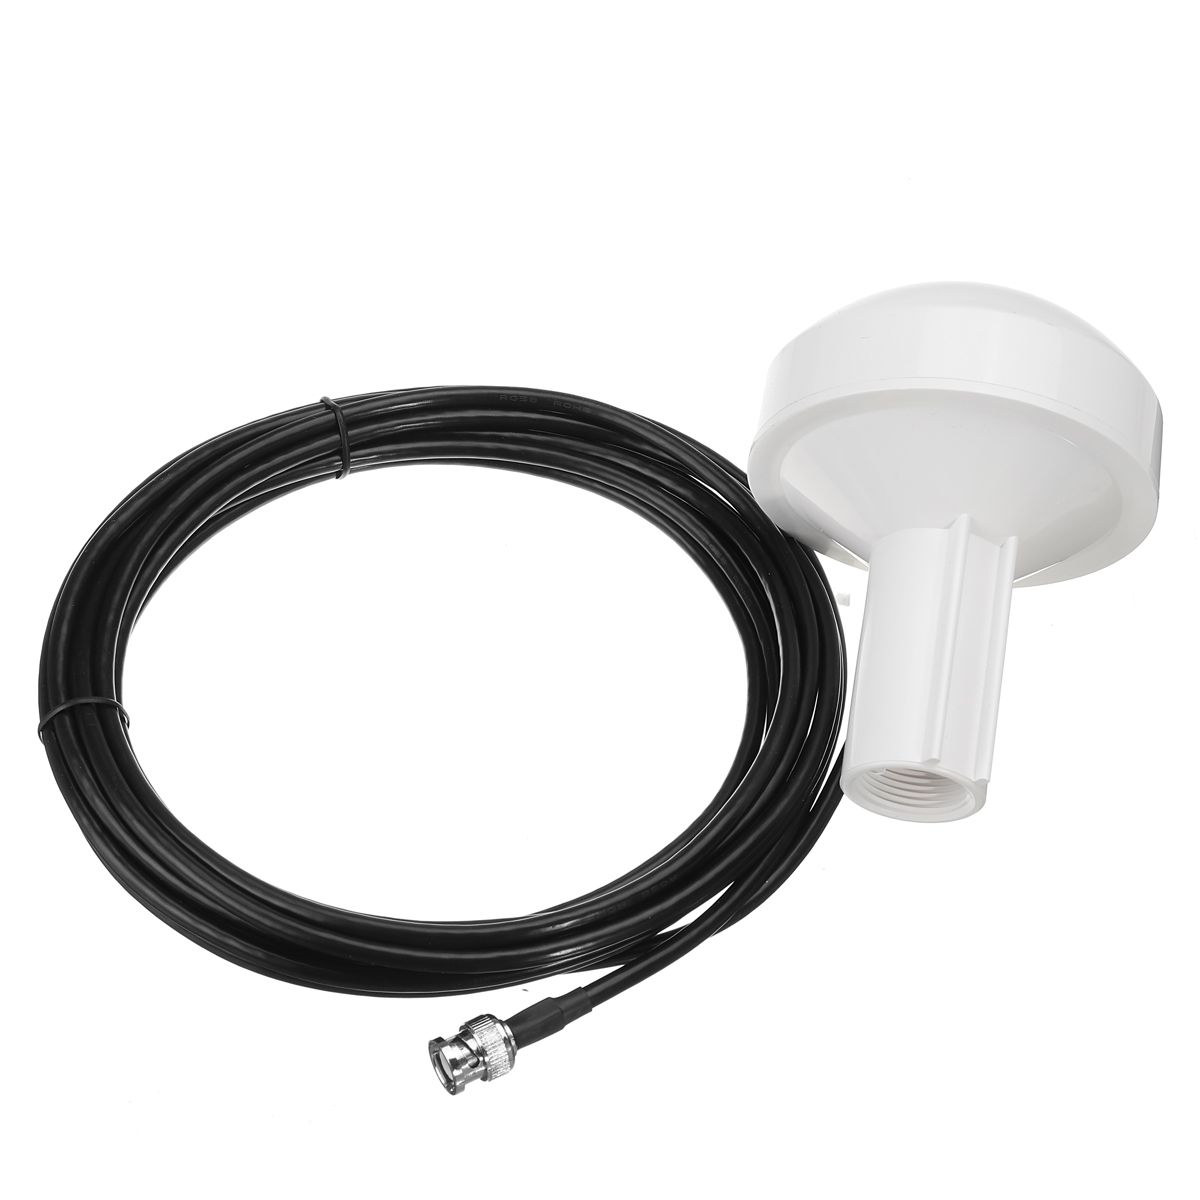 GPS-Active-Marine-Navigation-Antenna-5-Meters-With-BNC-Male-Plug-Connector-New-1019250